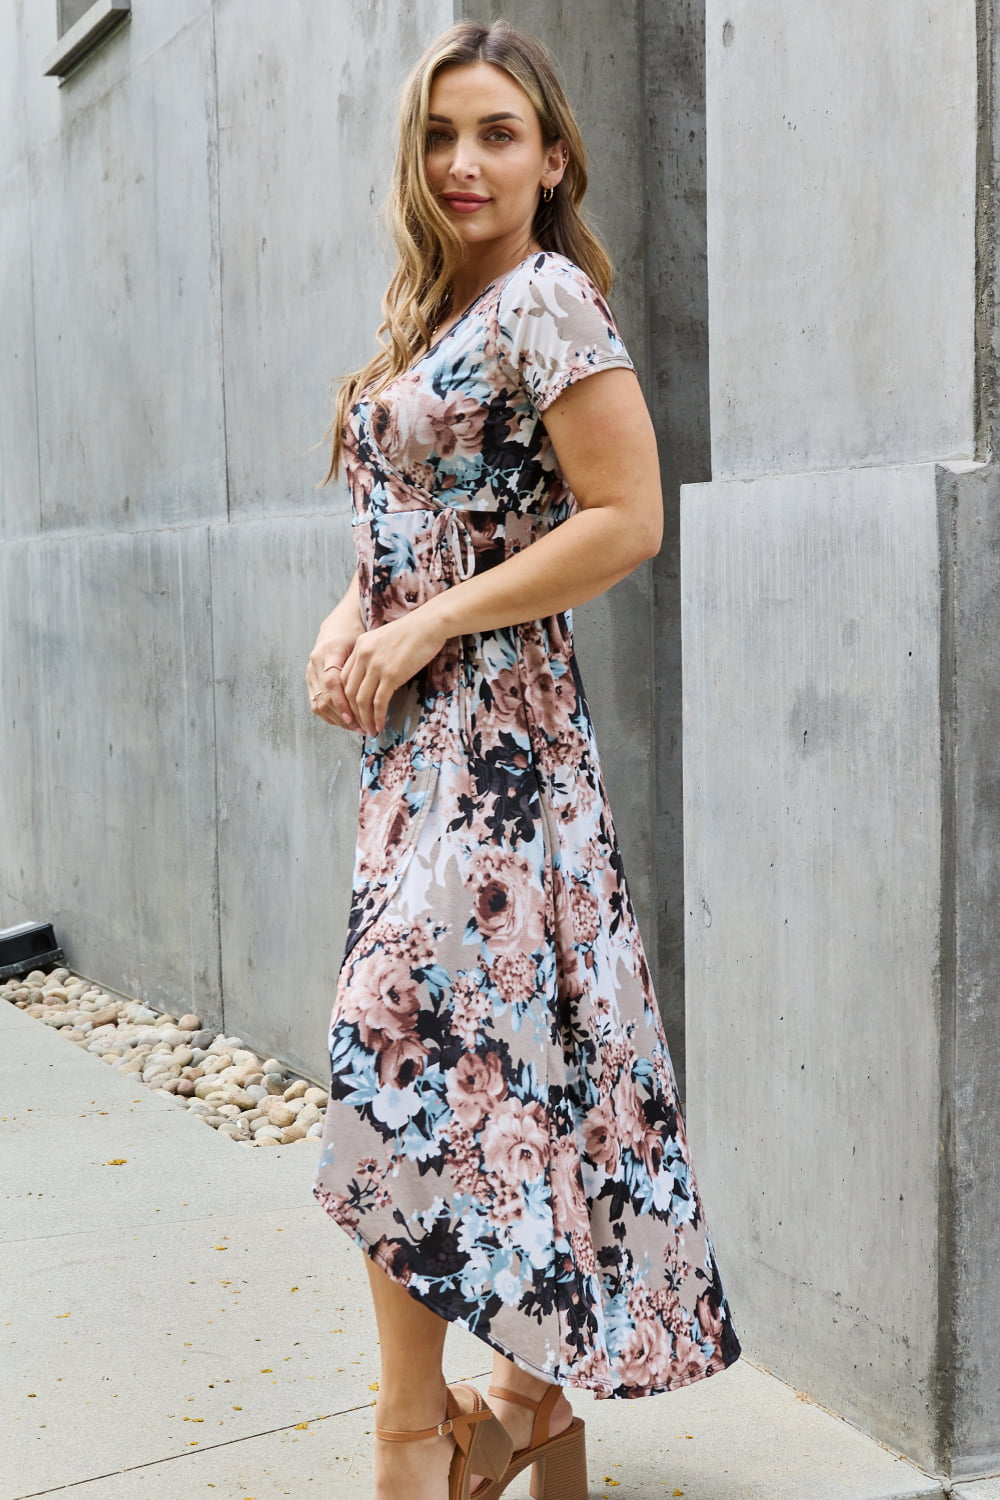 Give Me Roses Full Size Floral Maxi Wrap Dress - All Dresses - Dresses - 7 - 2024